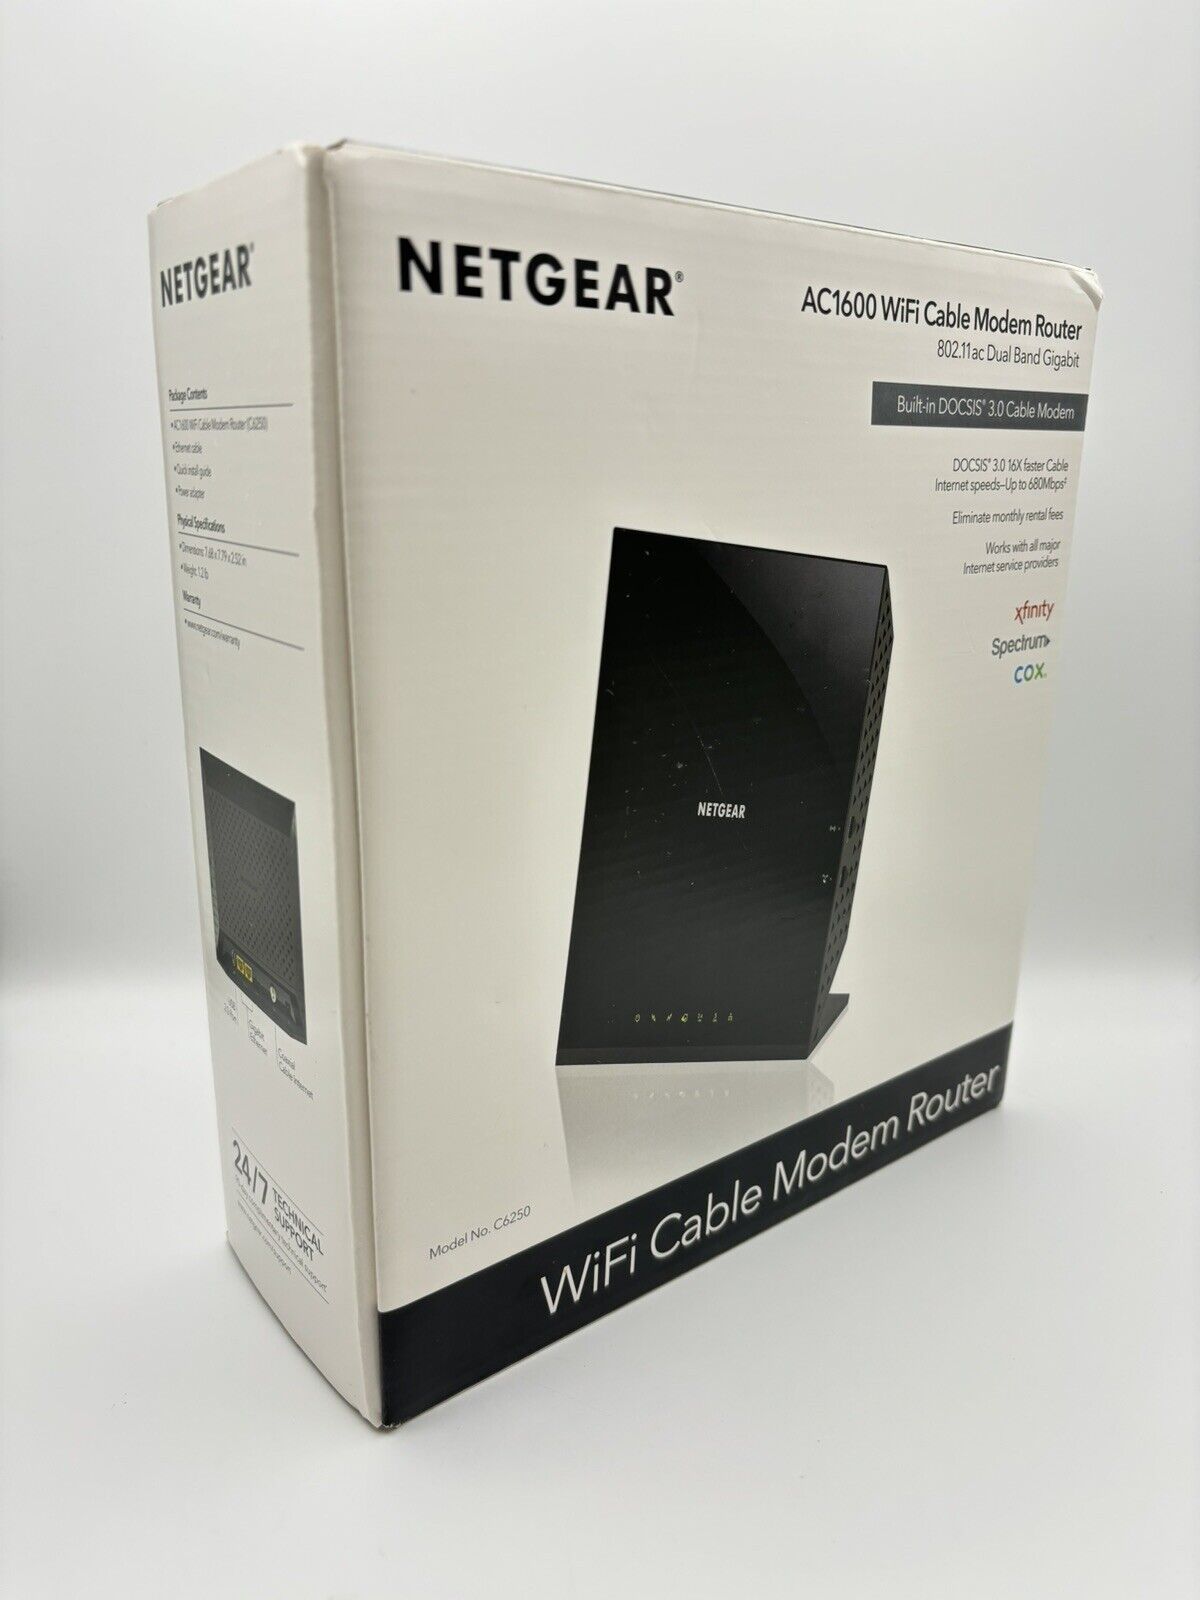 NETGEAR AC1600 WiFi Cable Modem Router Combo C6250 100NAS New • Replaces Rentals